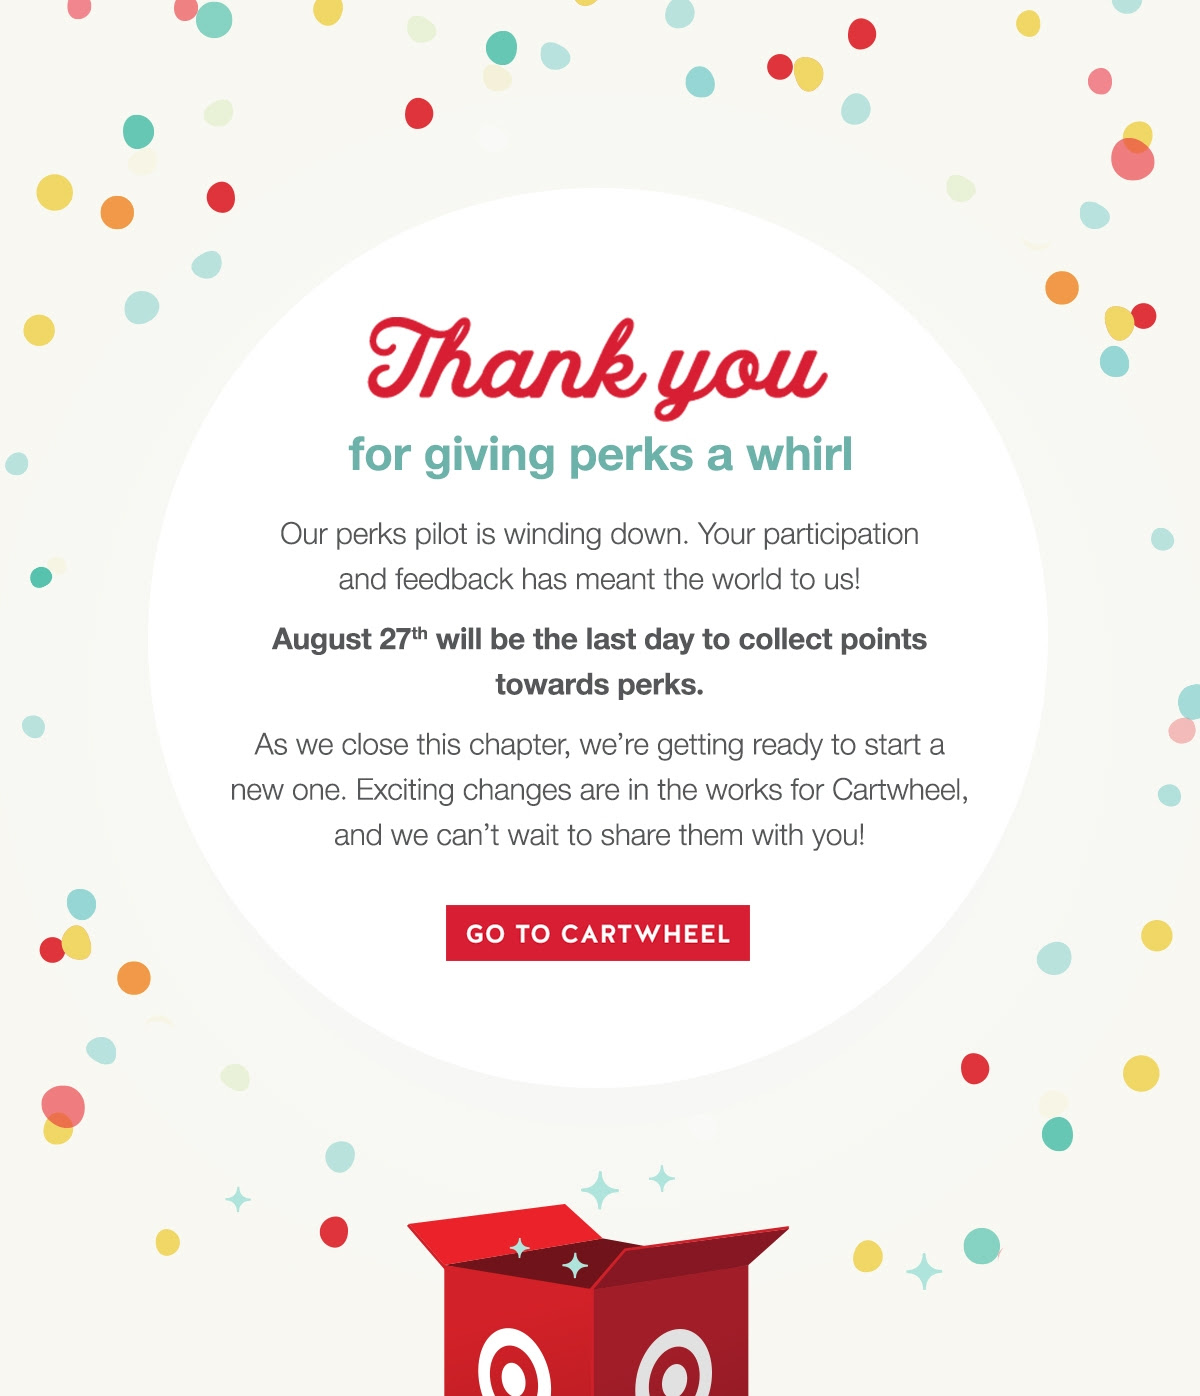 Thanks for giving perks a whirl. Our perks pilot is winding down. Yyour participation and feedback has meant the world to us. August 27th will be the last day to collect points towards perks. As we close this chapter, we're getting ready to start a new one. Exciting changes are in the works for Cartwheel, and we can't wait to share them with you!